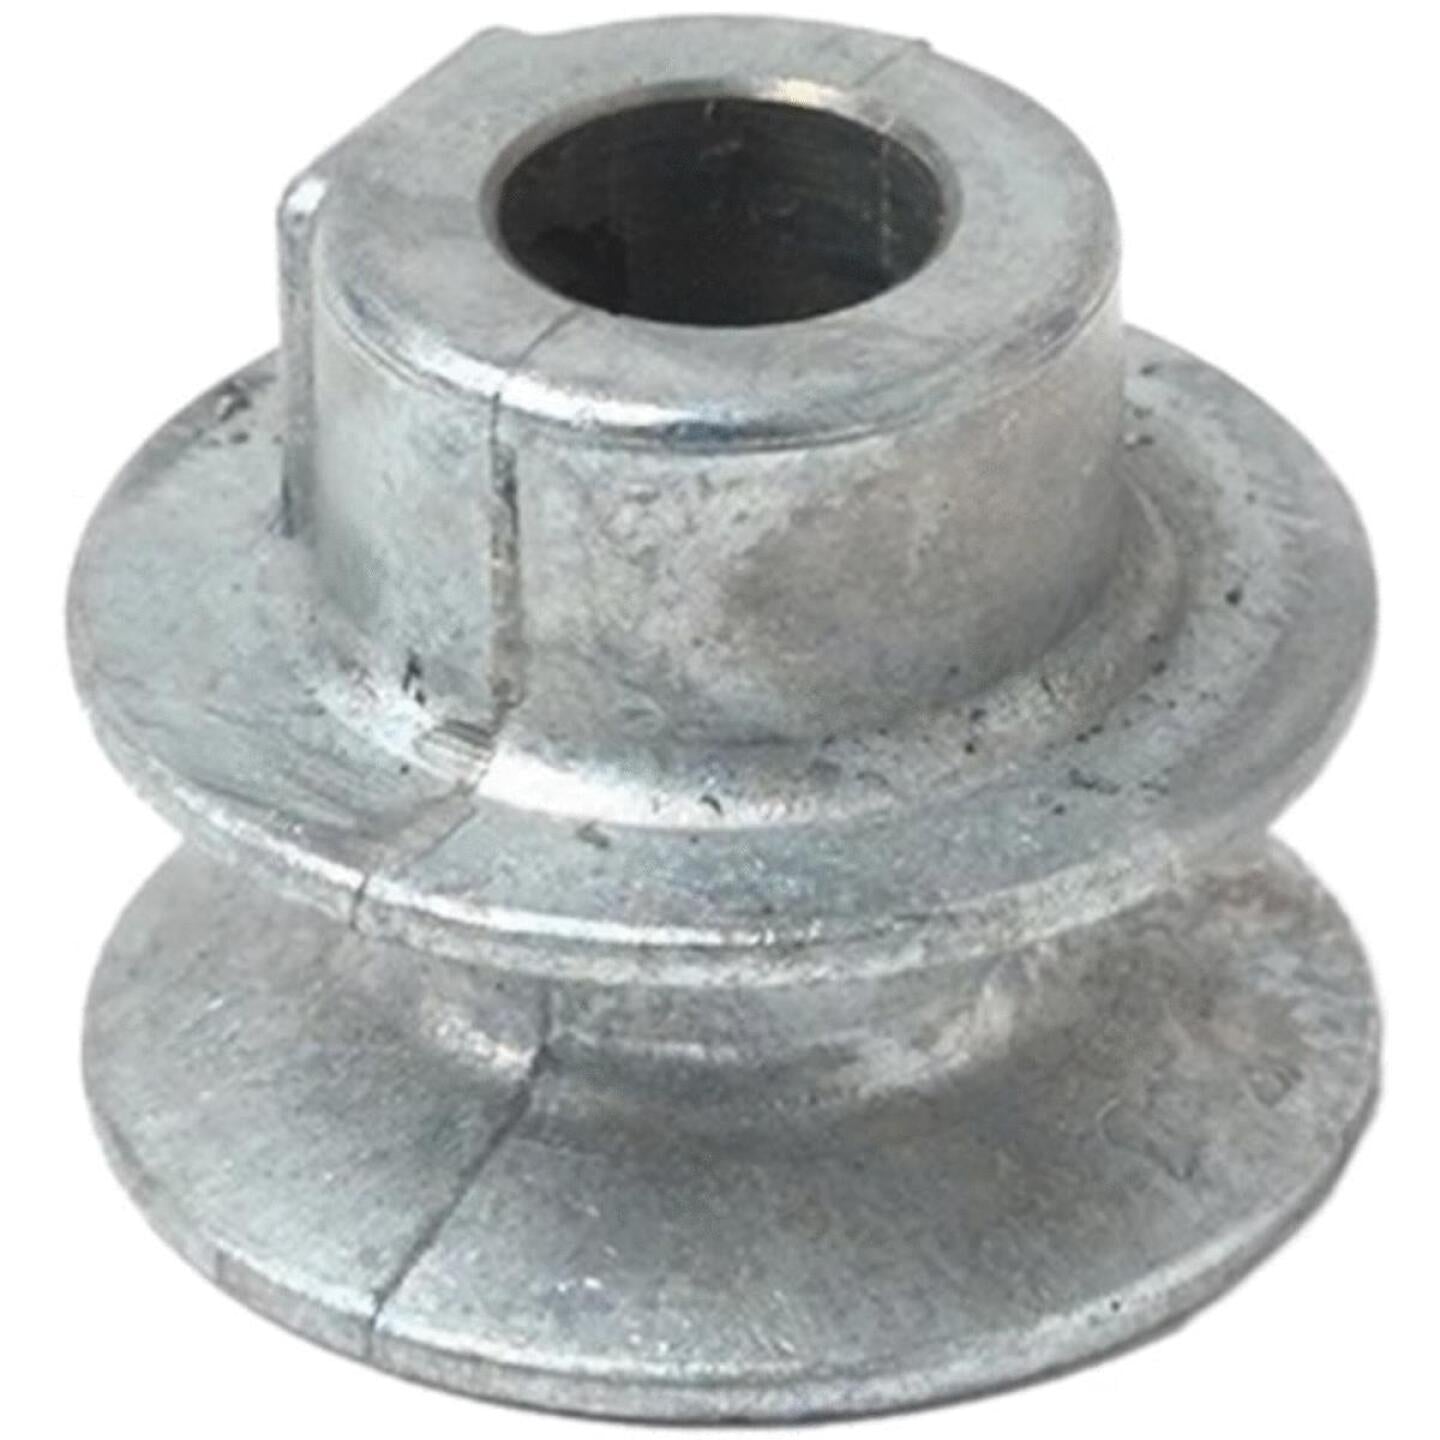 Chicago Die Casting, Chicago Die Casting 1-1/2 In. x 1/2 In. Single Groove Pulley